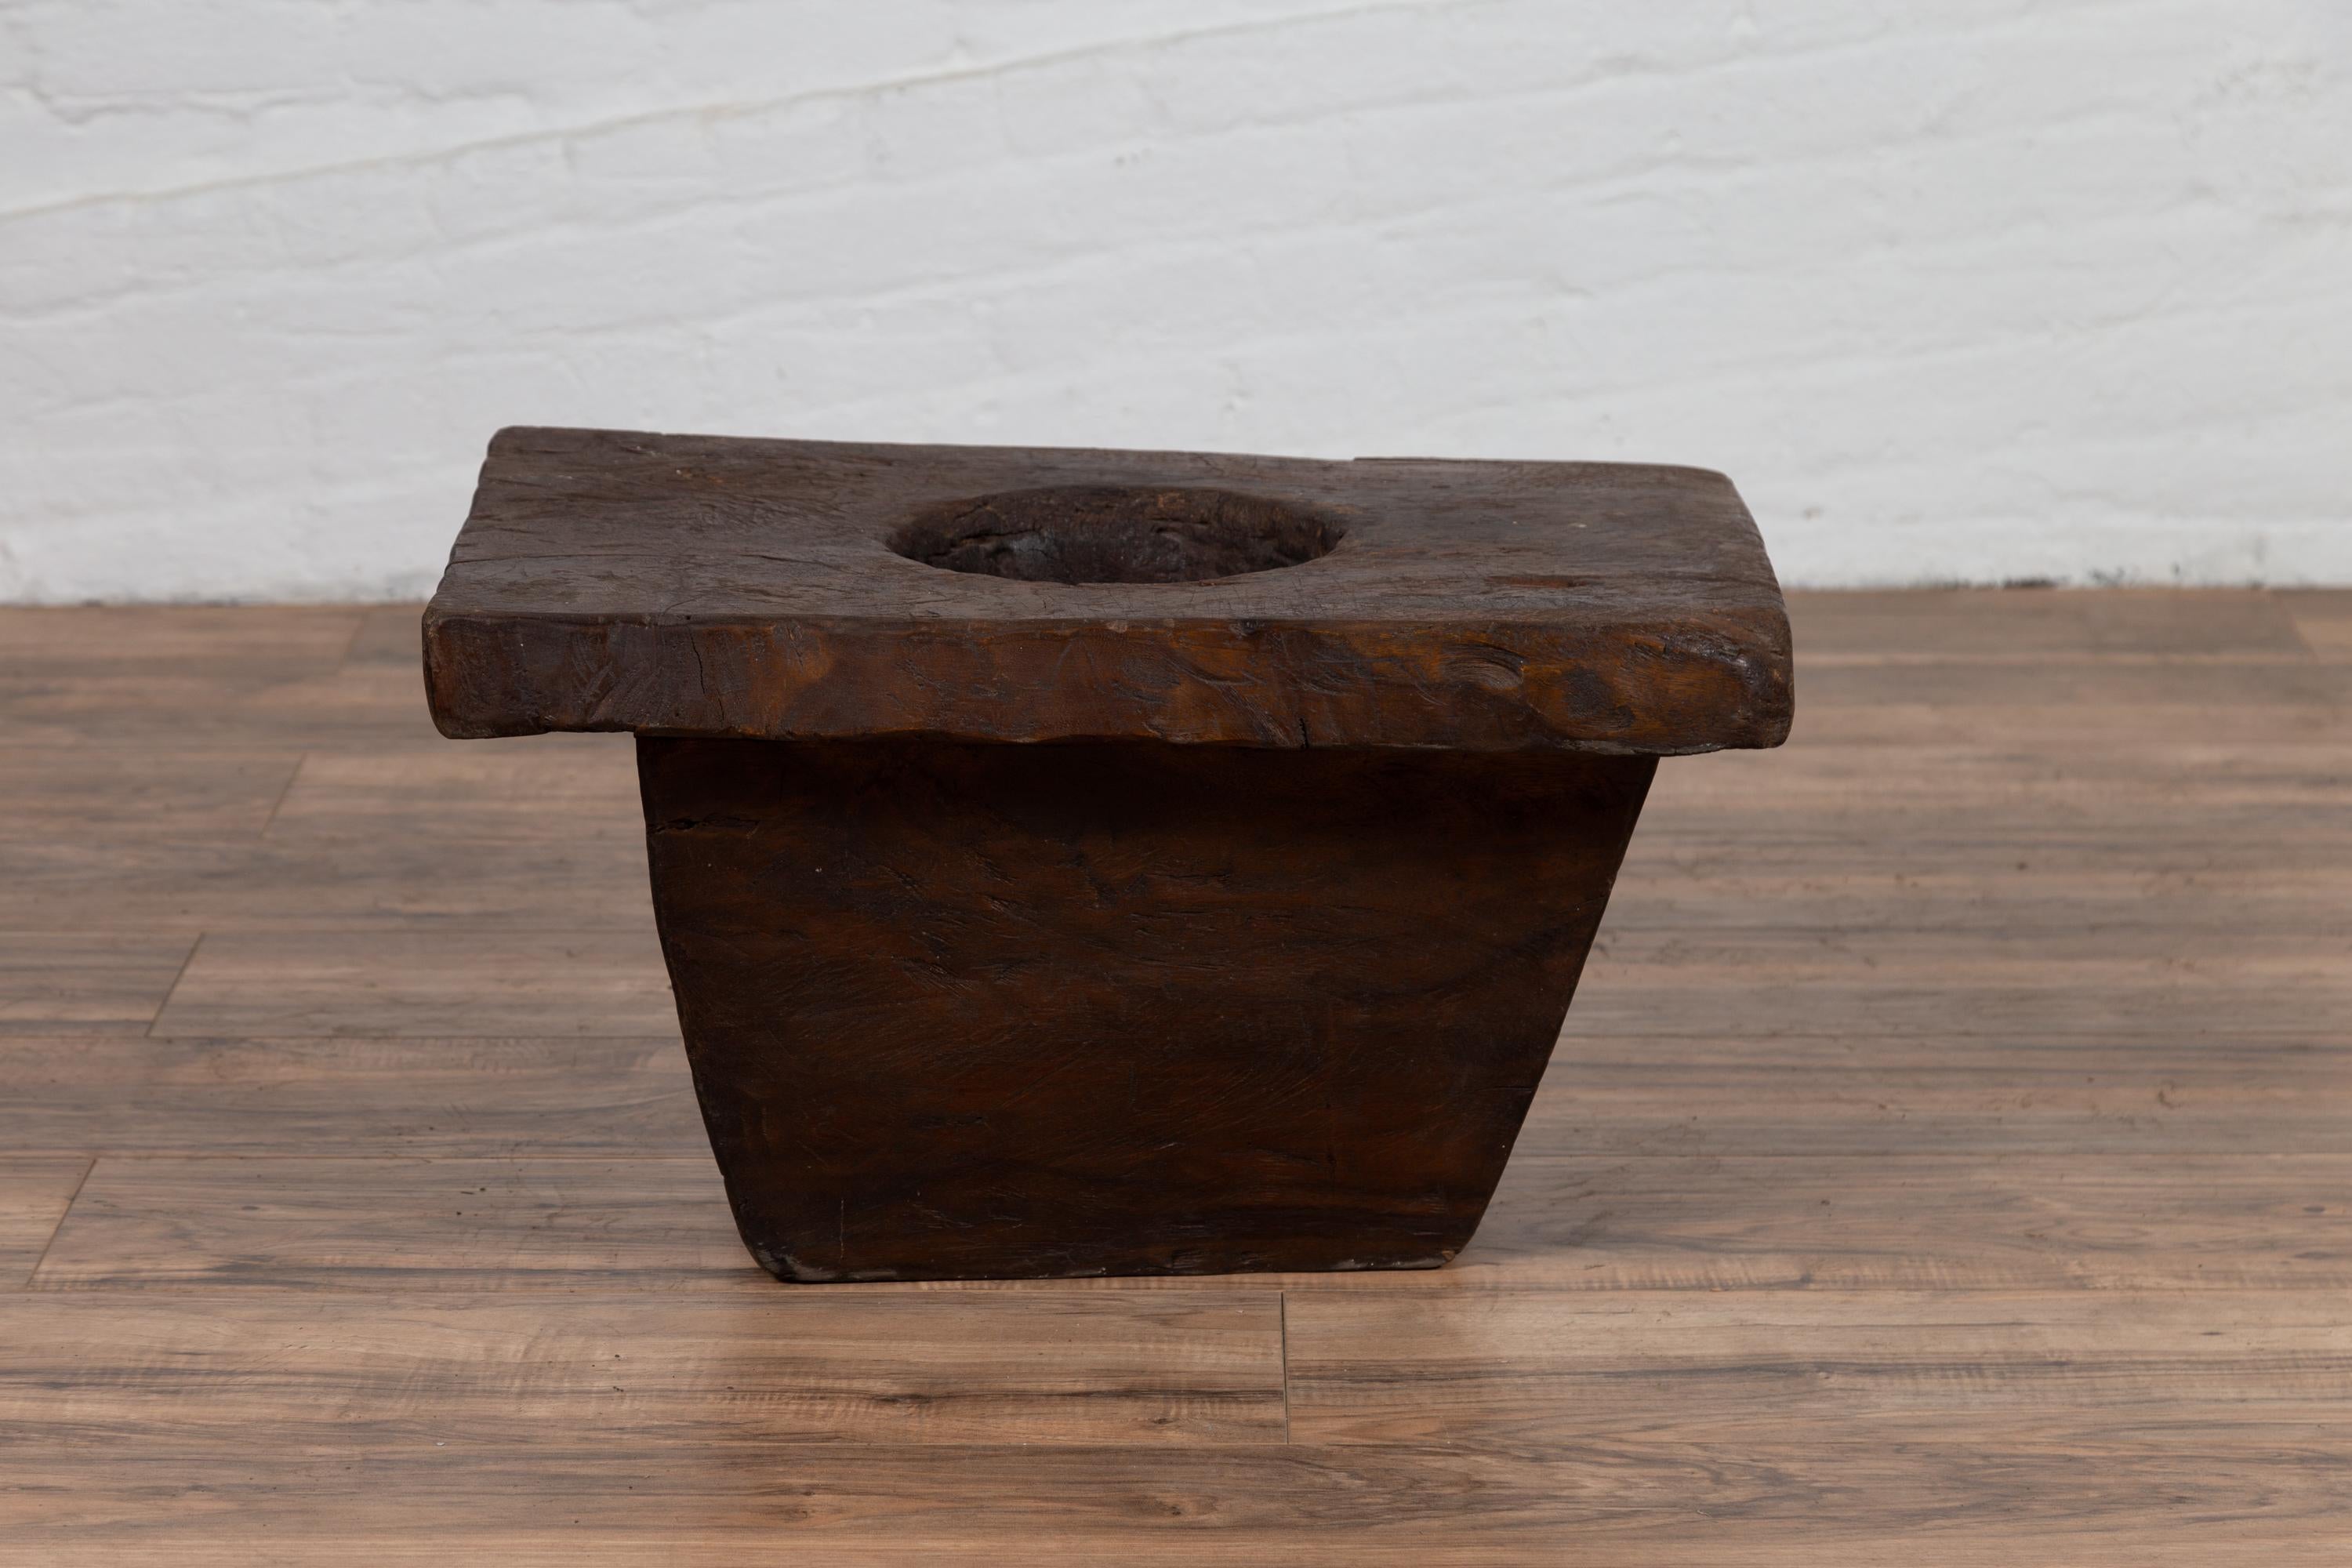 An antique Indonesian wooden planter of rustic appearance from the early 20th century. Born in Indonesia during the early years of the 20th century, this wooden planter charms our eyes with its simple appearance and weathered patina. Featuring a